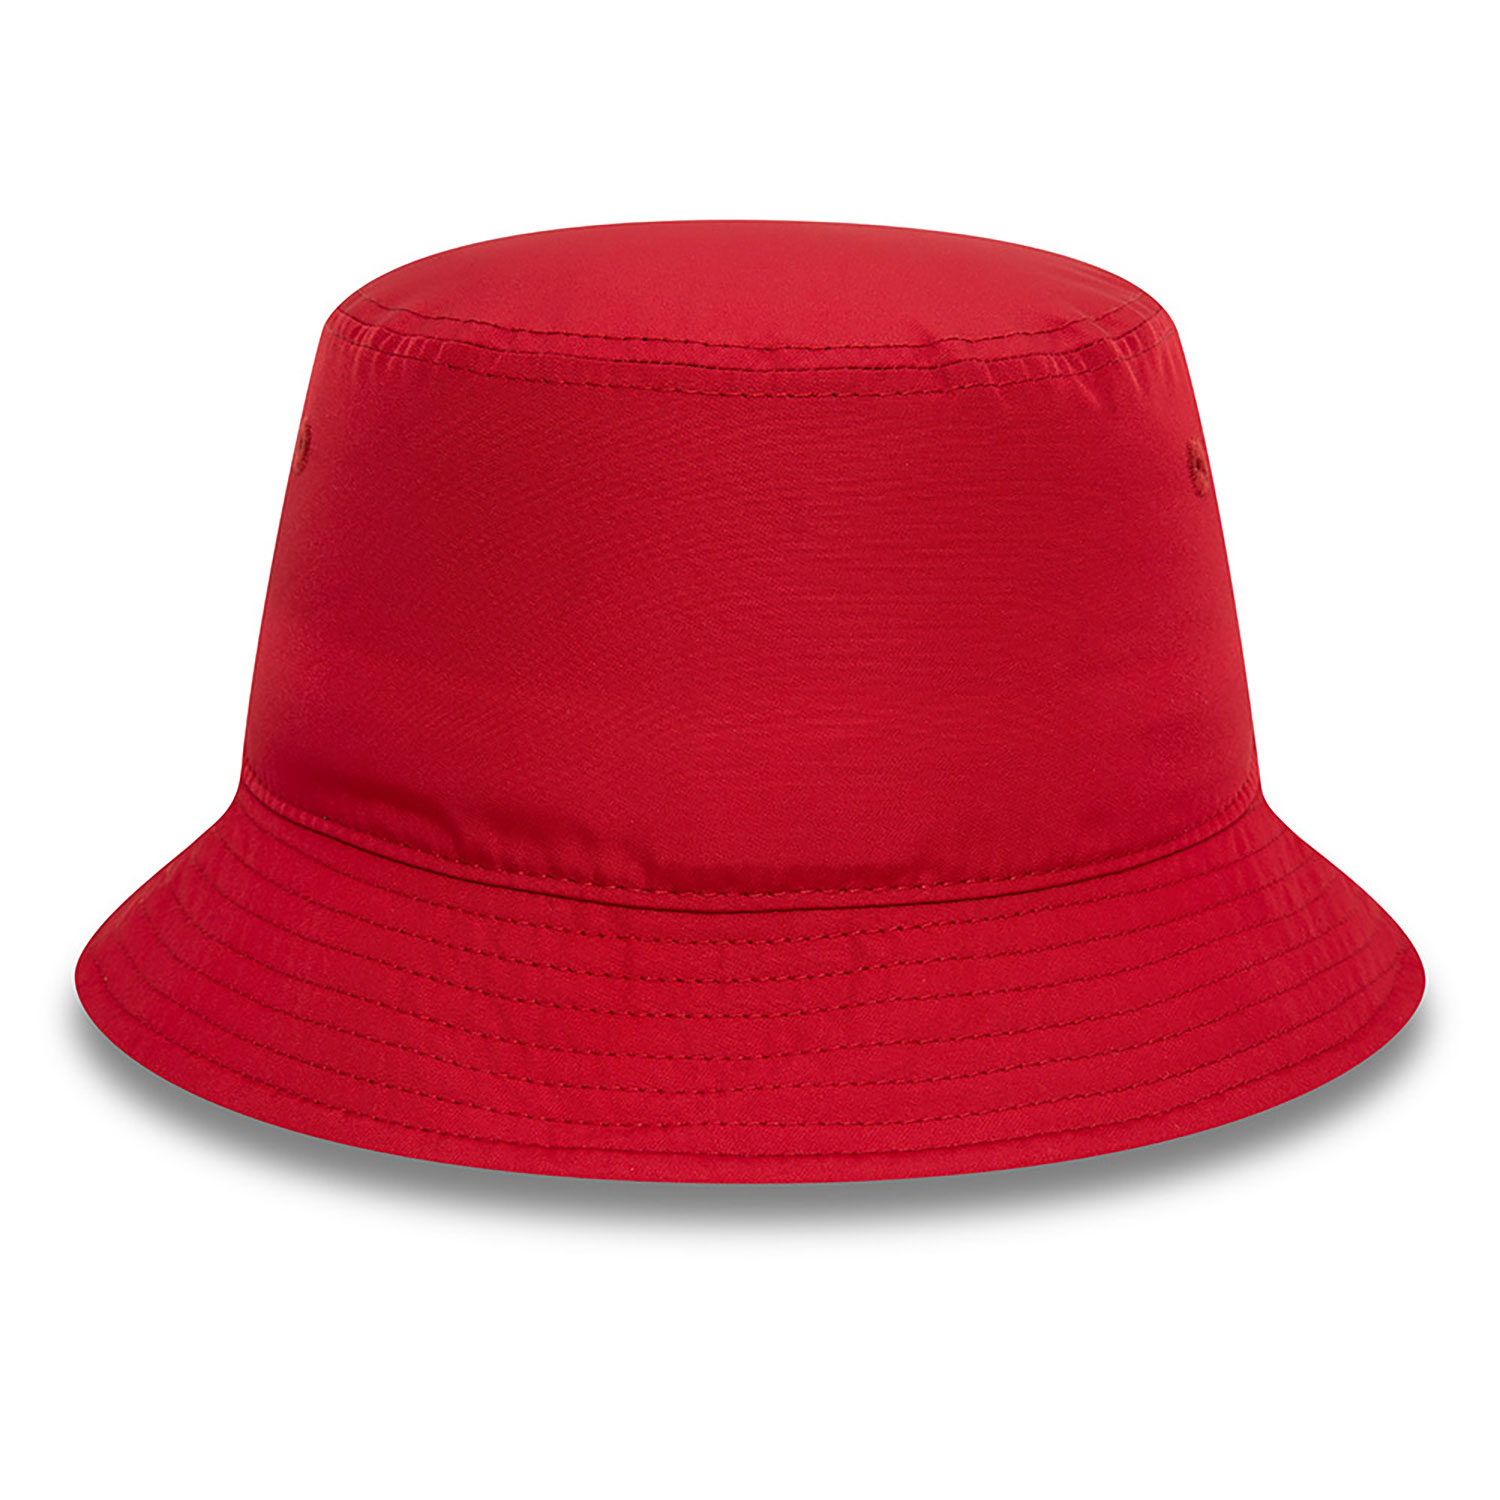 Stade Toulousain Gold Featherweight Polyester Red Bucket Hat